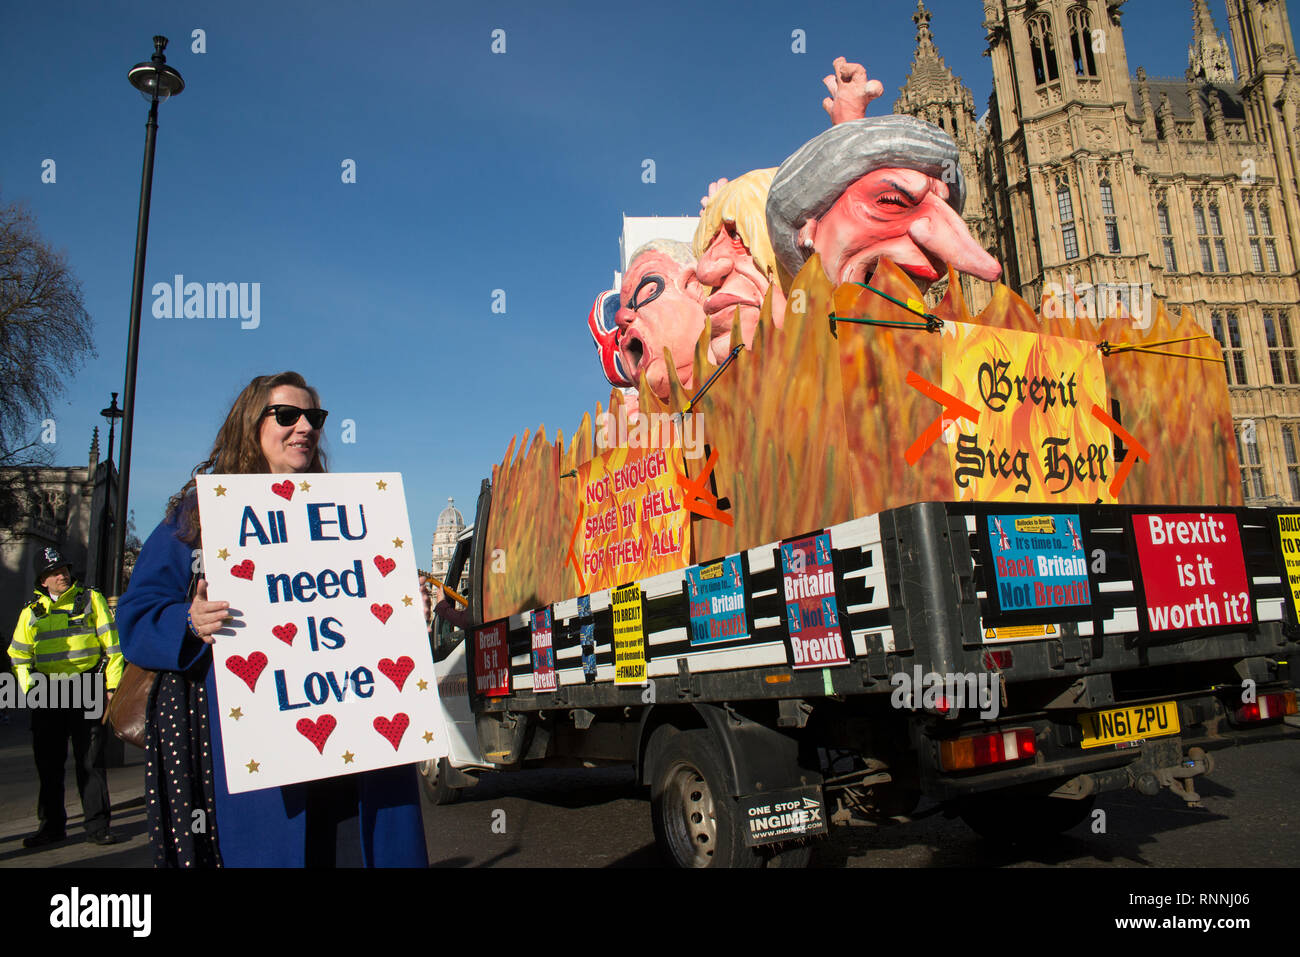 The Brexit Monstrosity passing the SODEM, St Valentines Day, Cake Not Hate event opposing Brexit. The float was created by Jacques Tilley. Stock Photo